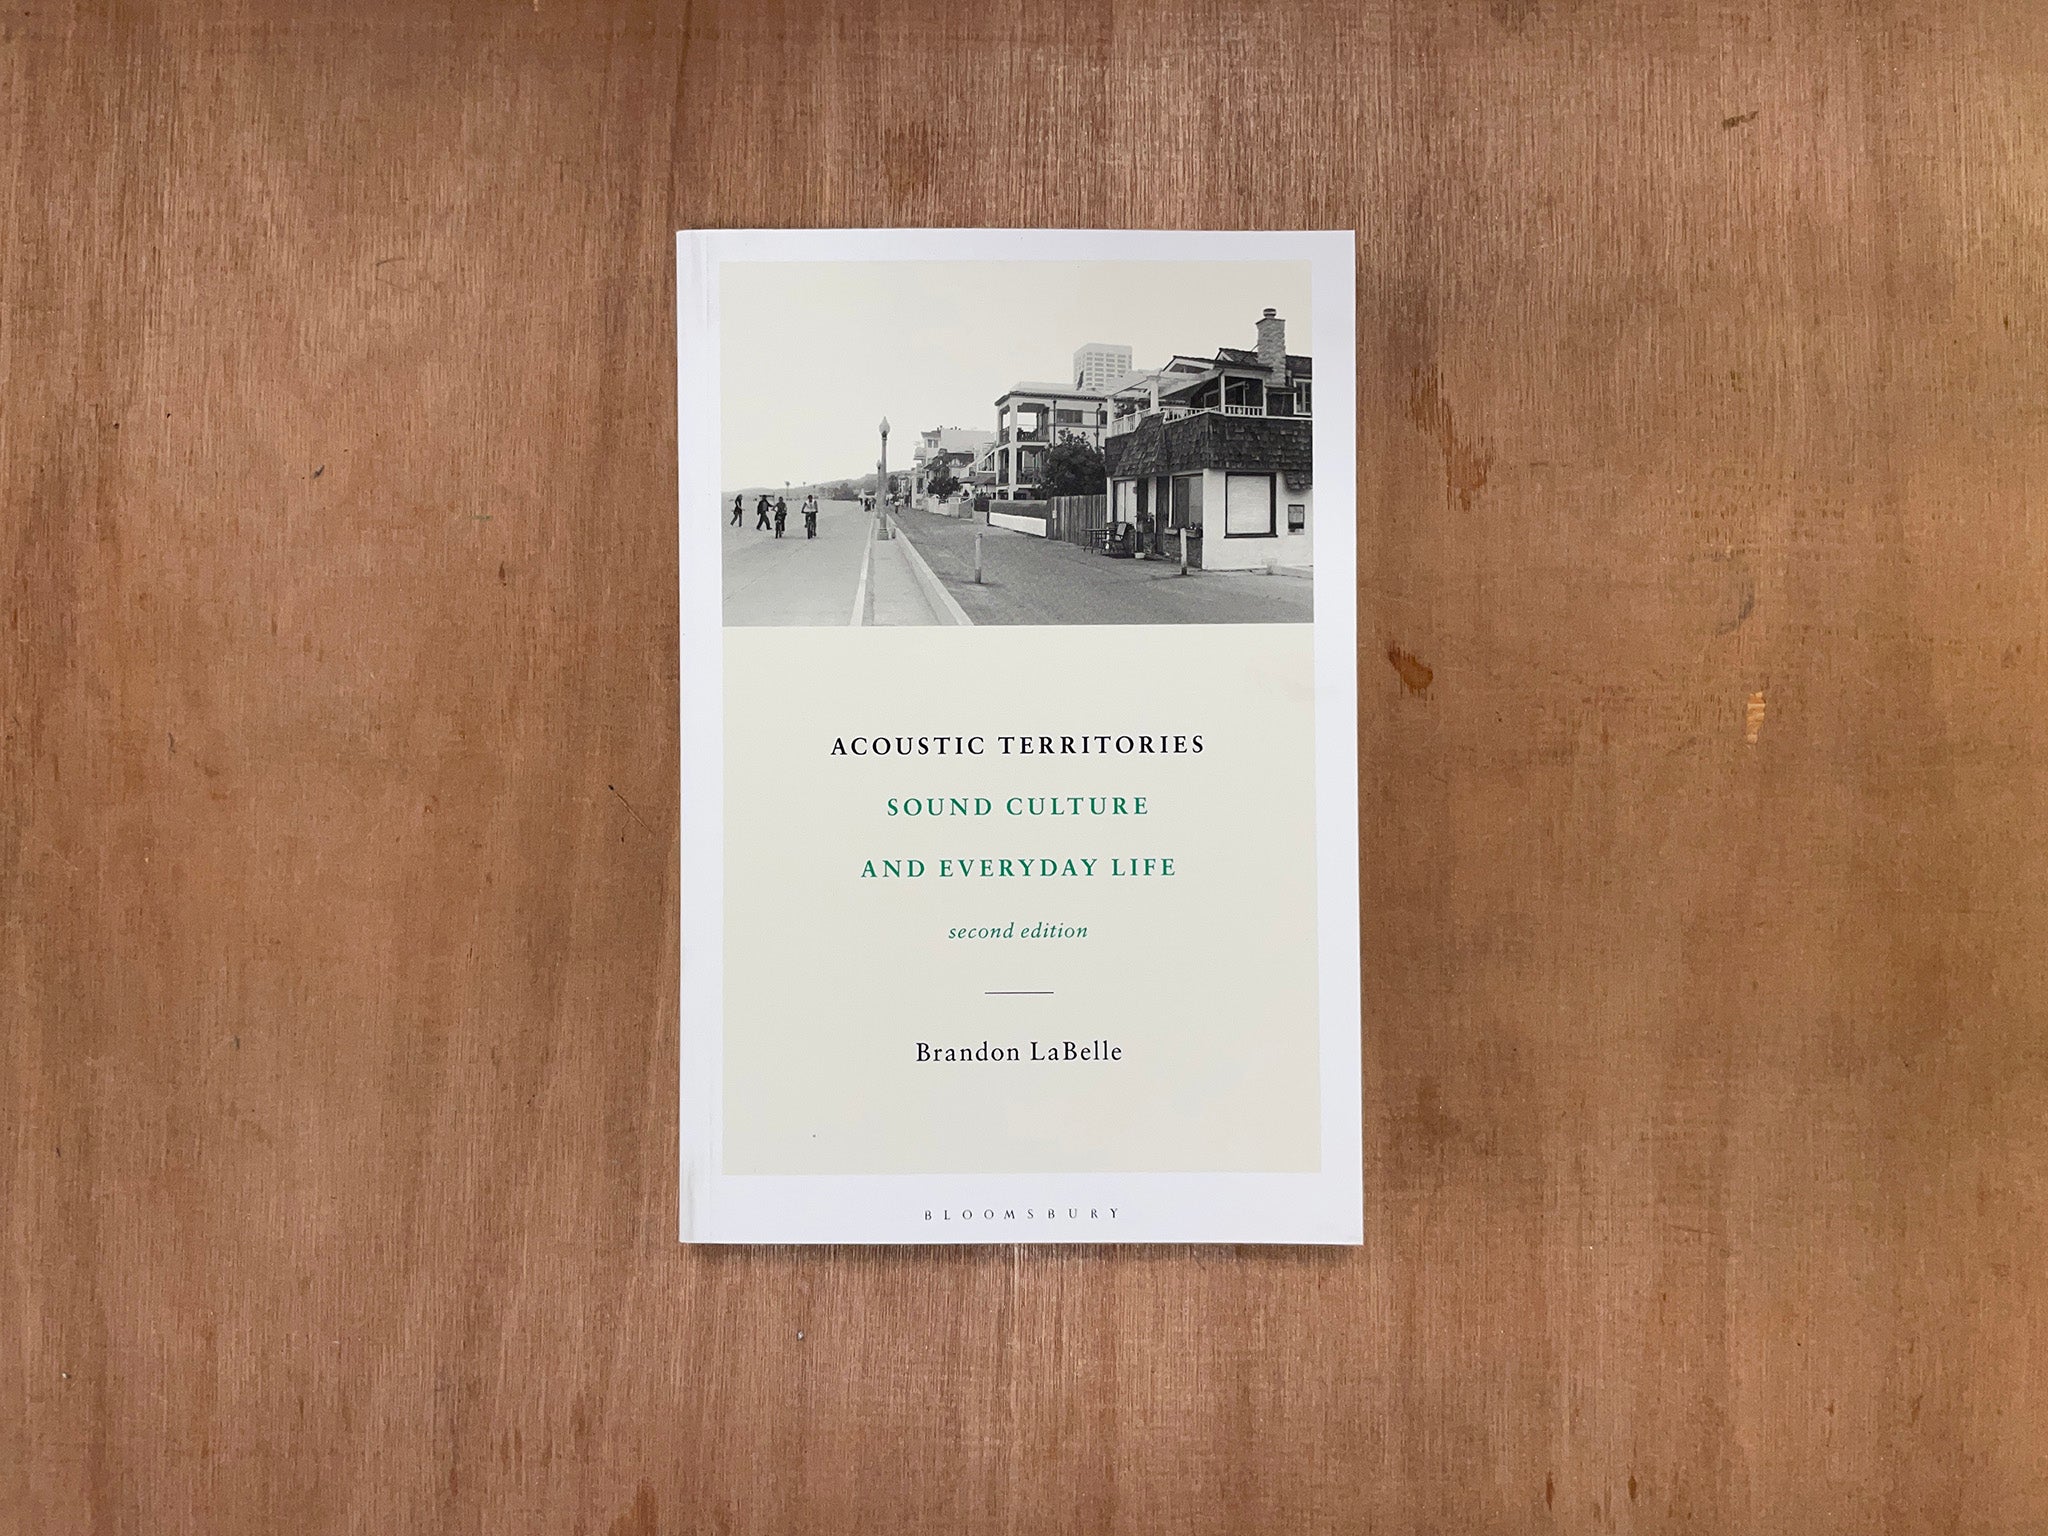 ACOUSTIC TERRITORIES: SOUND CULTURE AND EVERYDAY LIFE by Brandon LaBelle